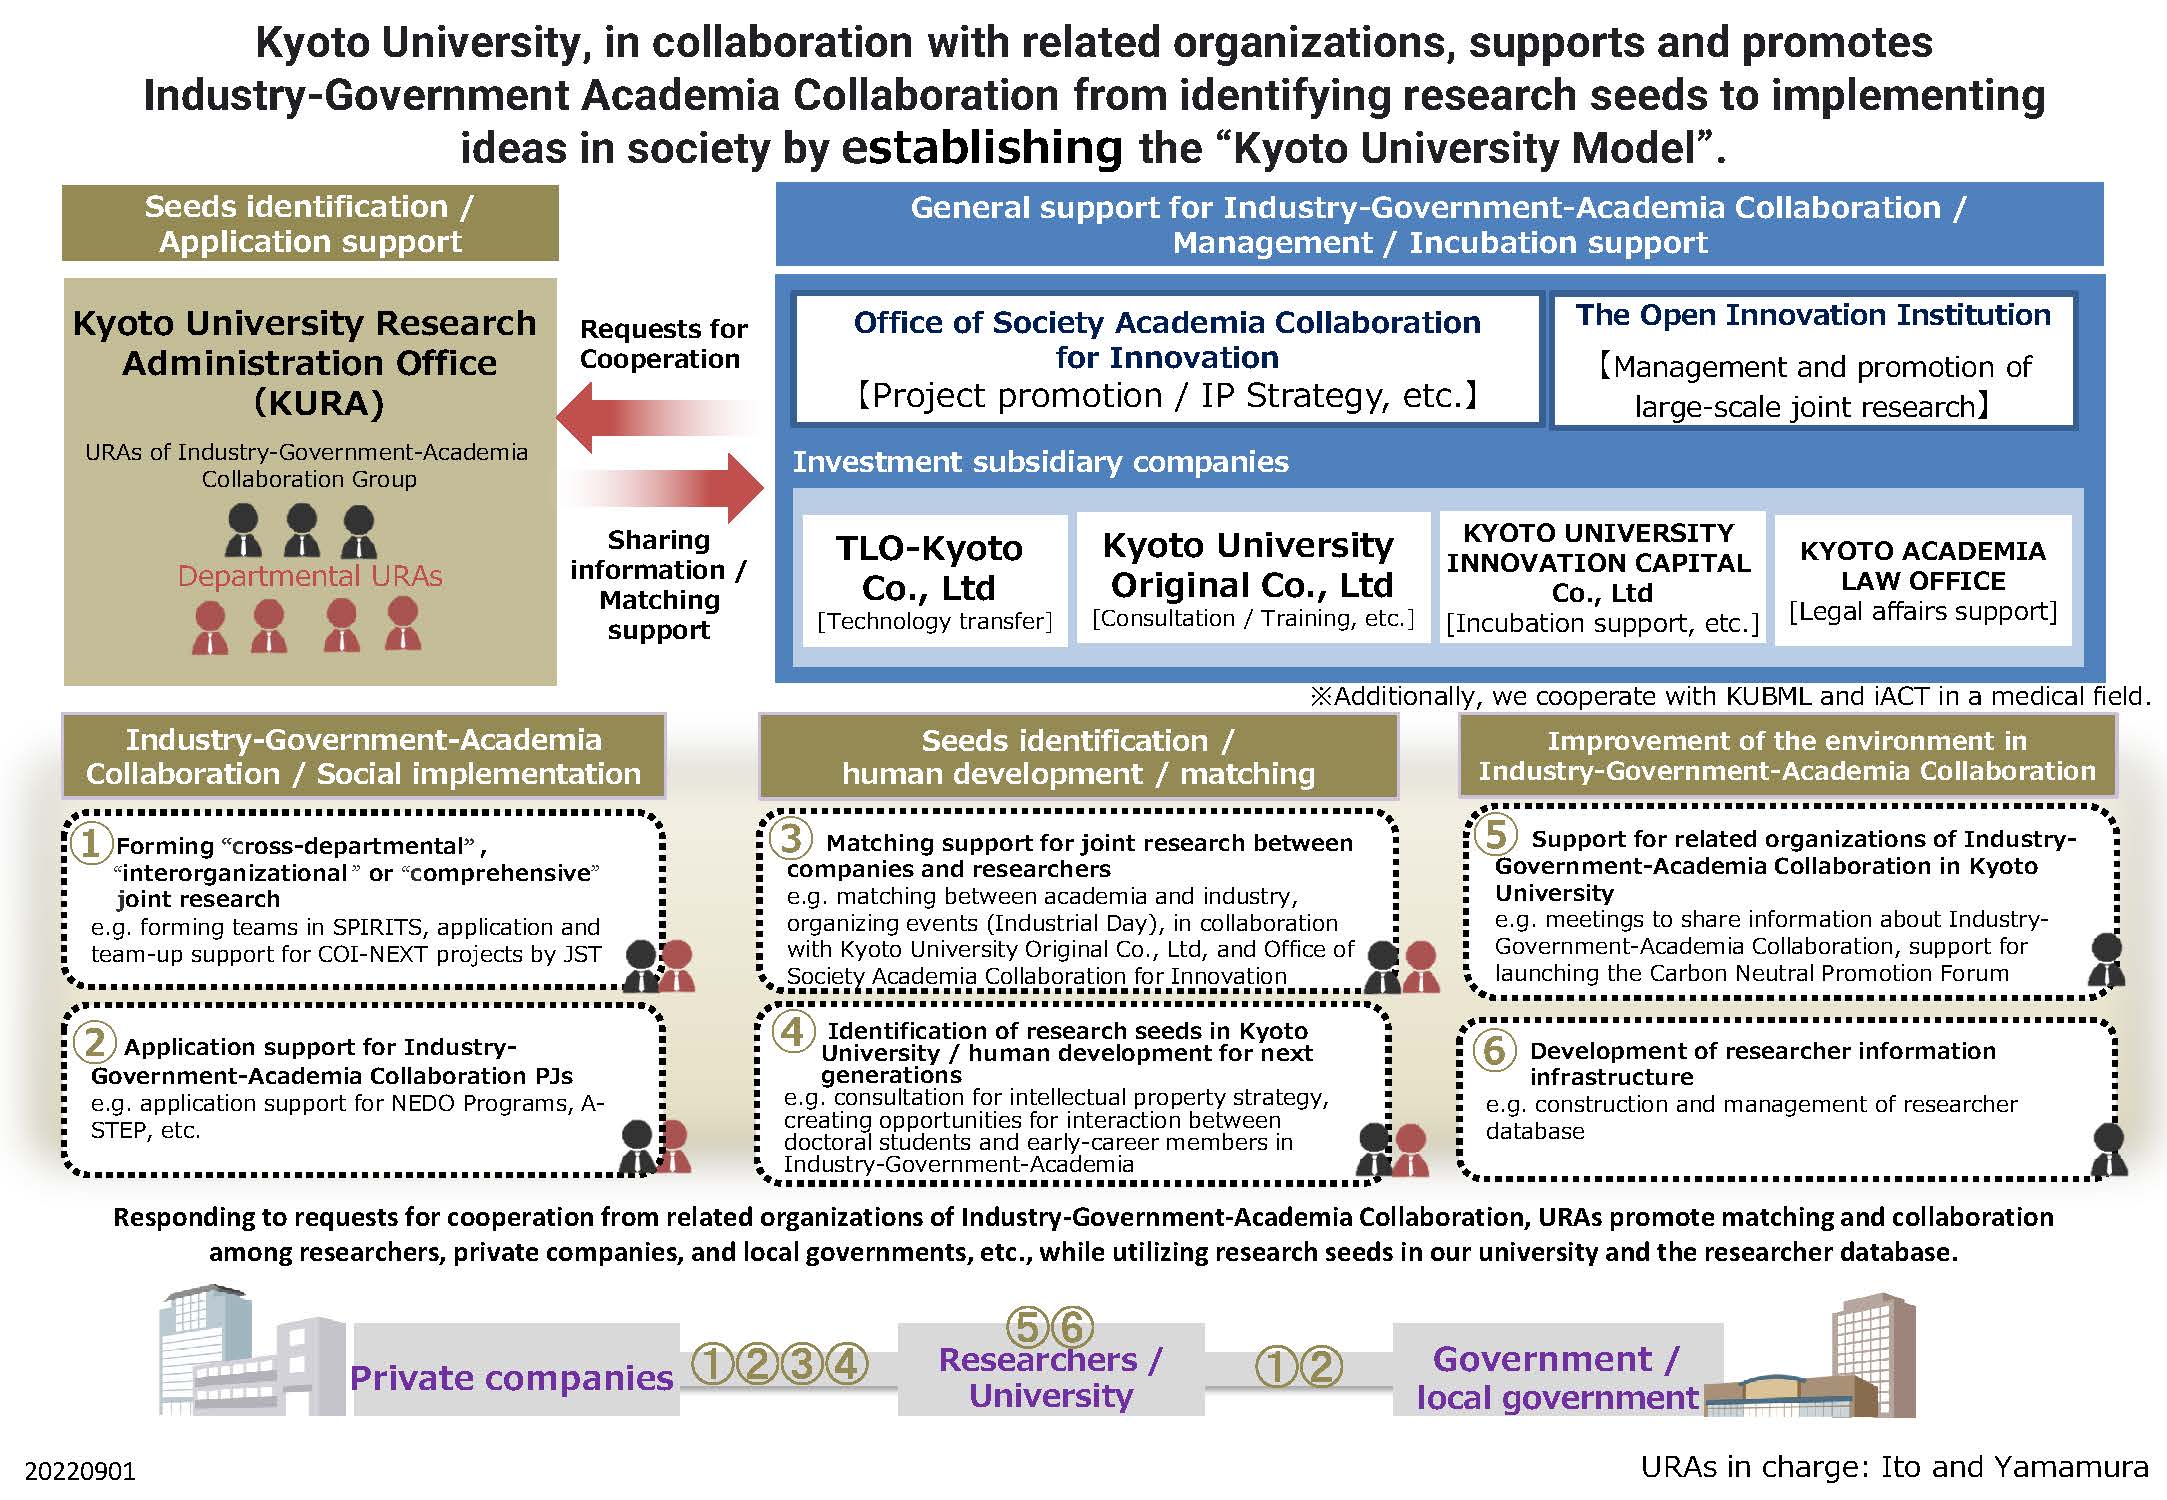 Industry-Government-Academia Collaboration